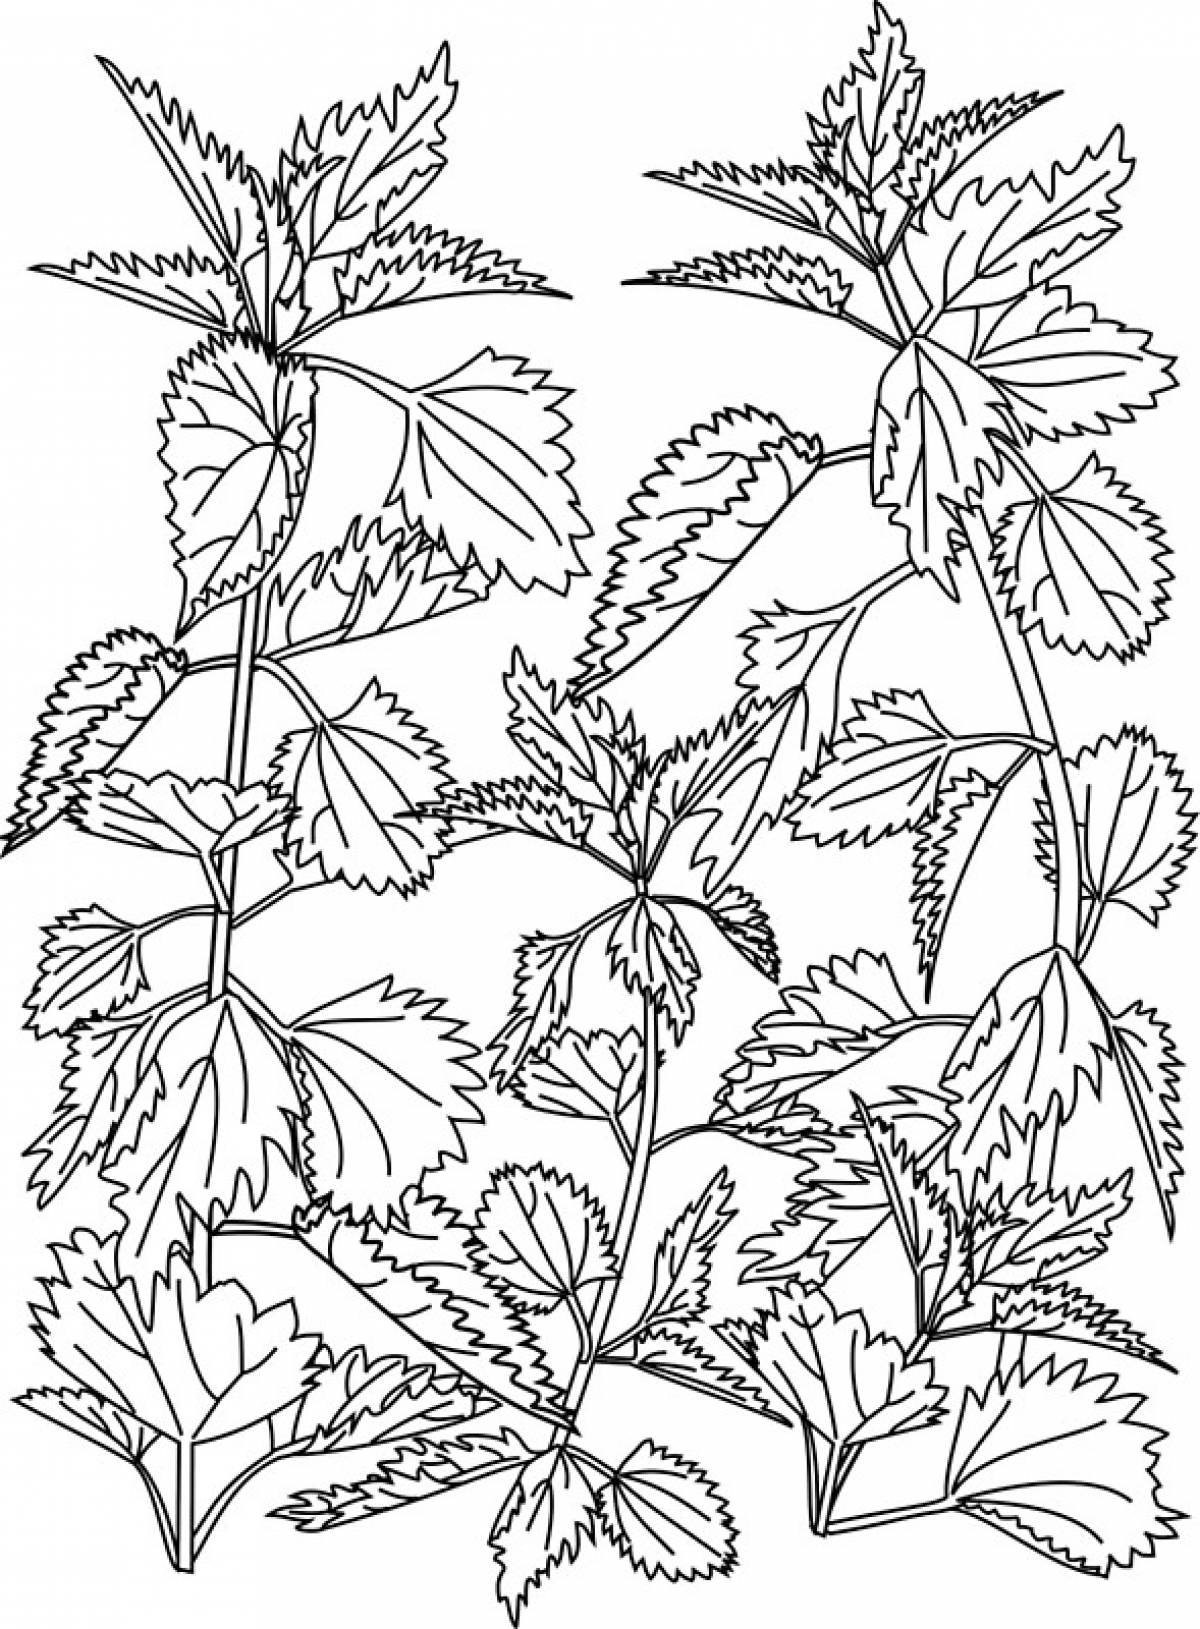 Nettle thickets